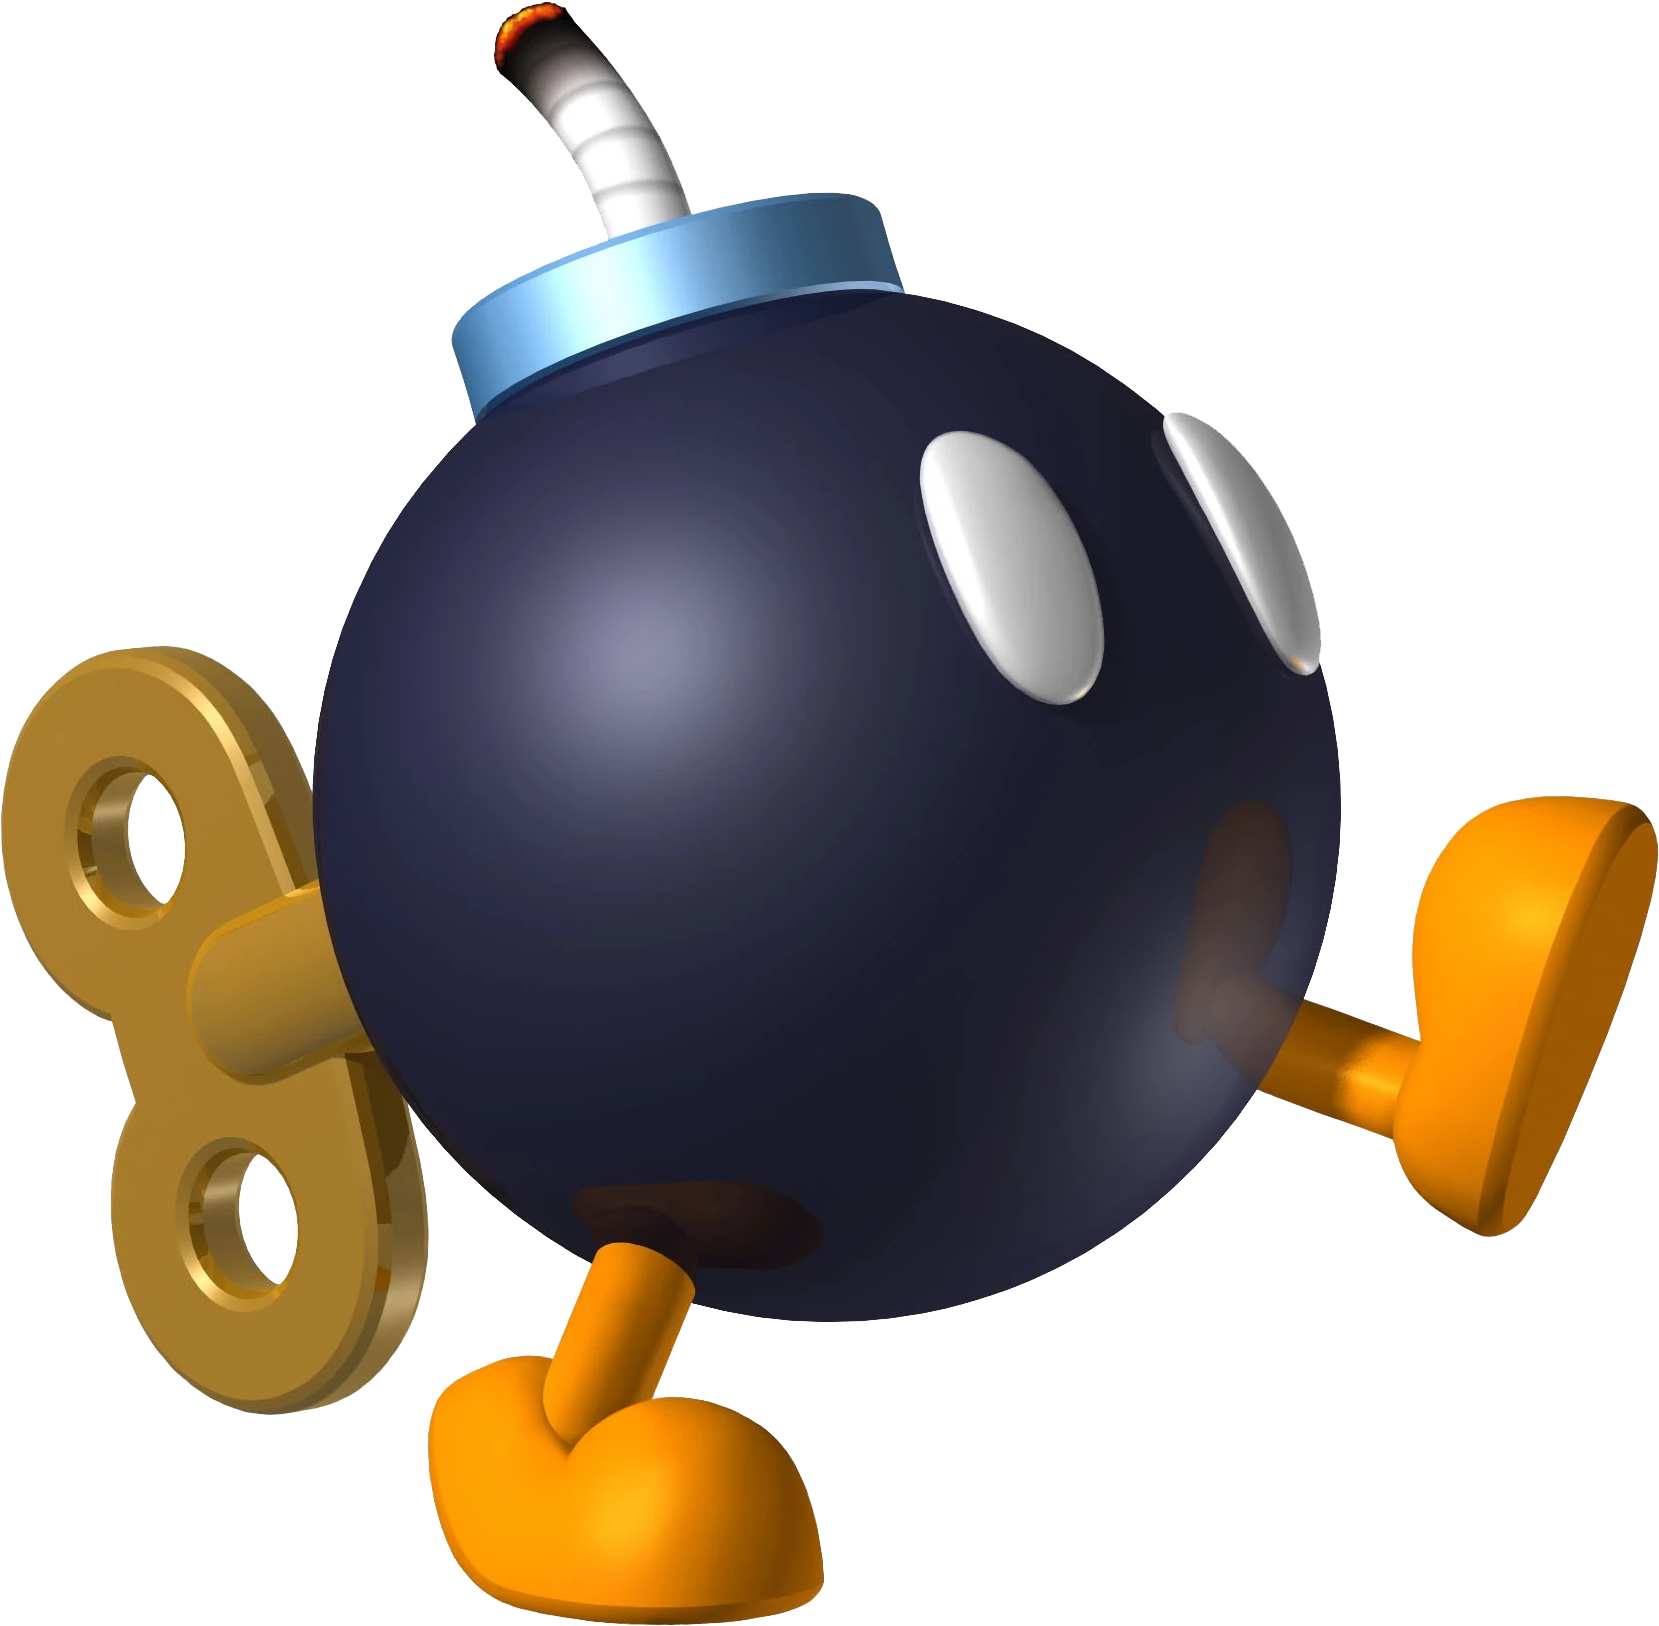 Bob-ombs, When Dropped Behind Or Thrown, Will Explode - Bob Omb (1695x1659)